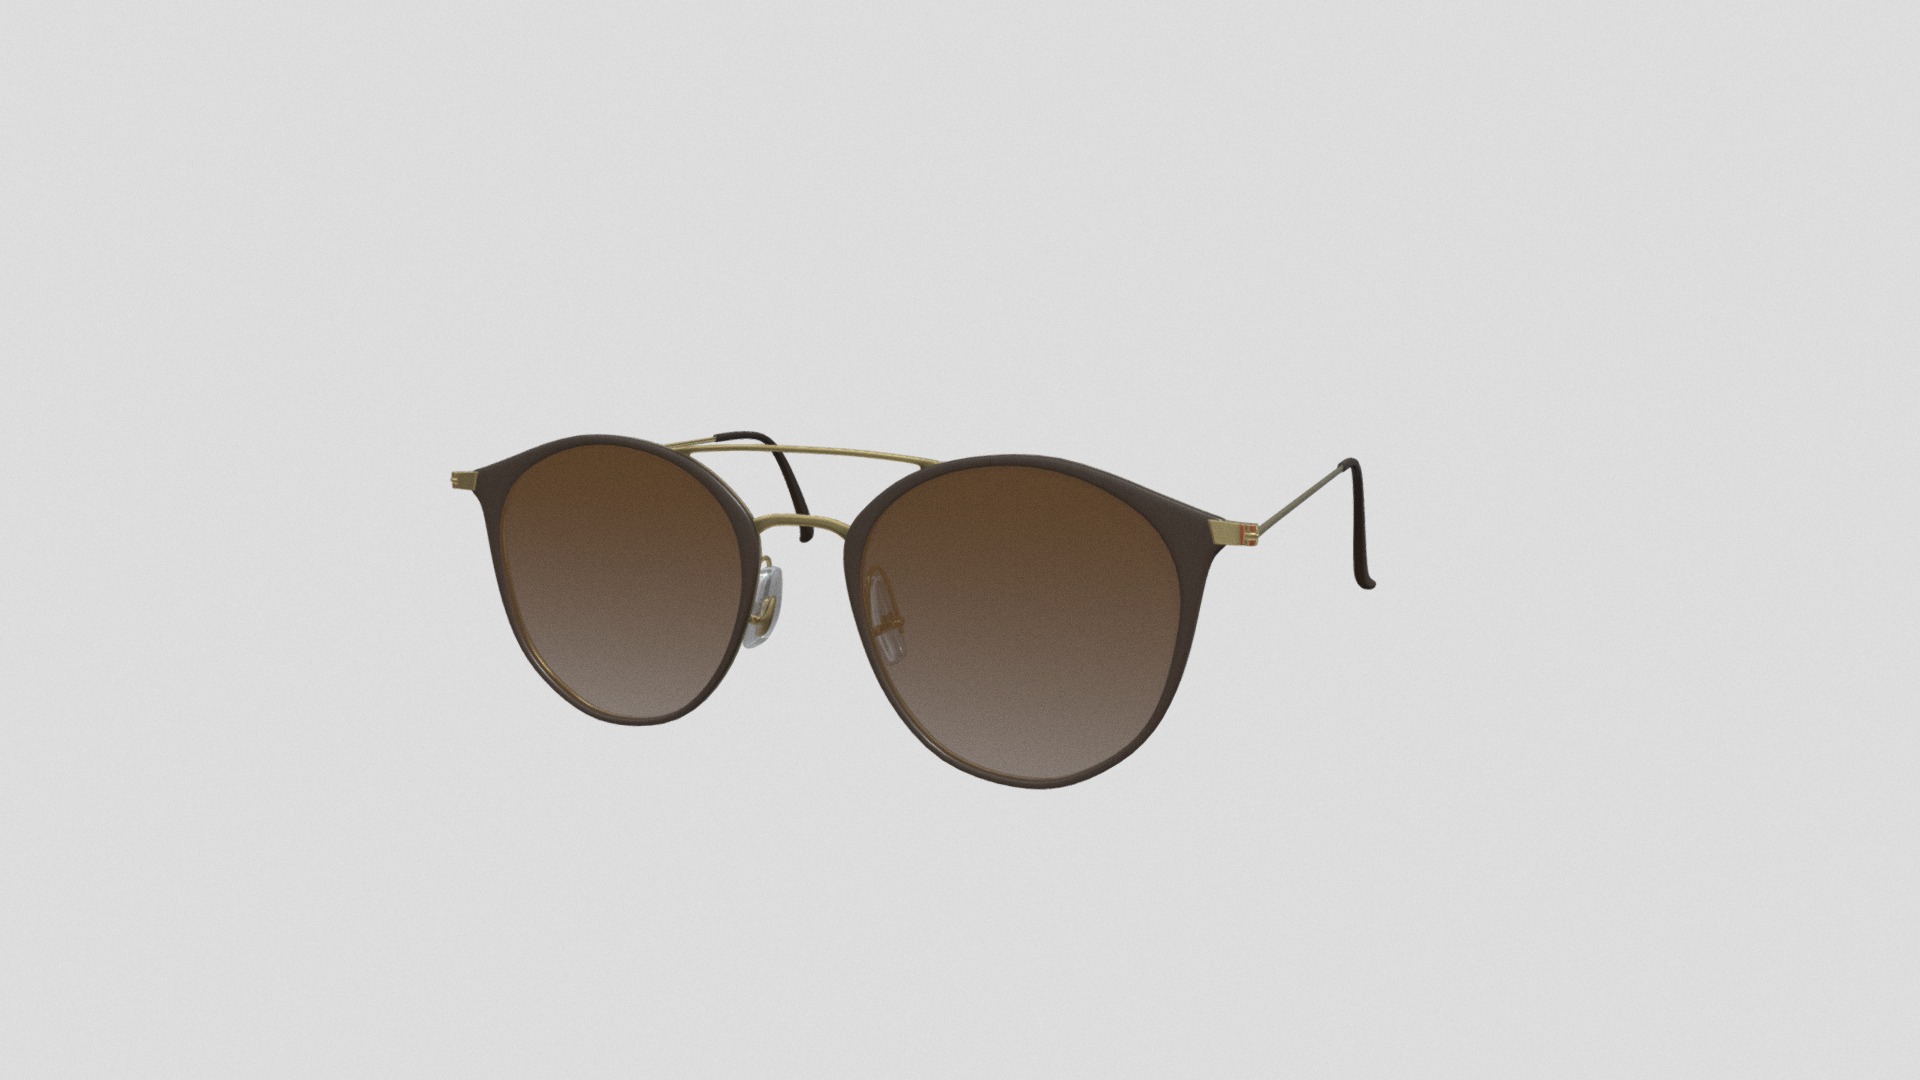 3D model Gold Sunglasses brown gradient - This is a 3D model of the Gold Sunglasses brown gradient. The 3D model is about a pair of sunglasses.